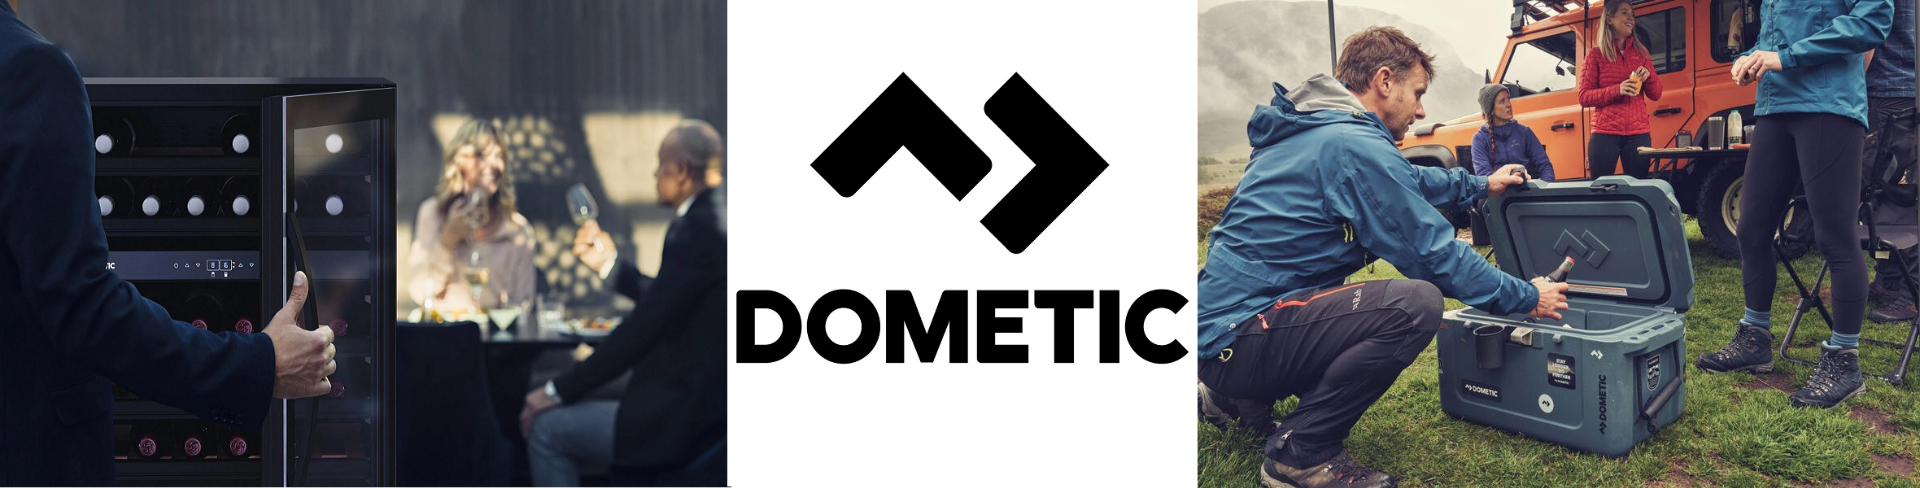 Dometic brand banner